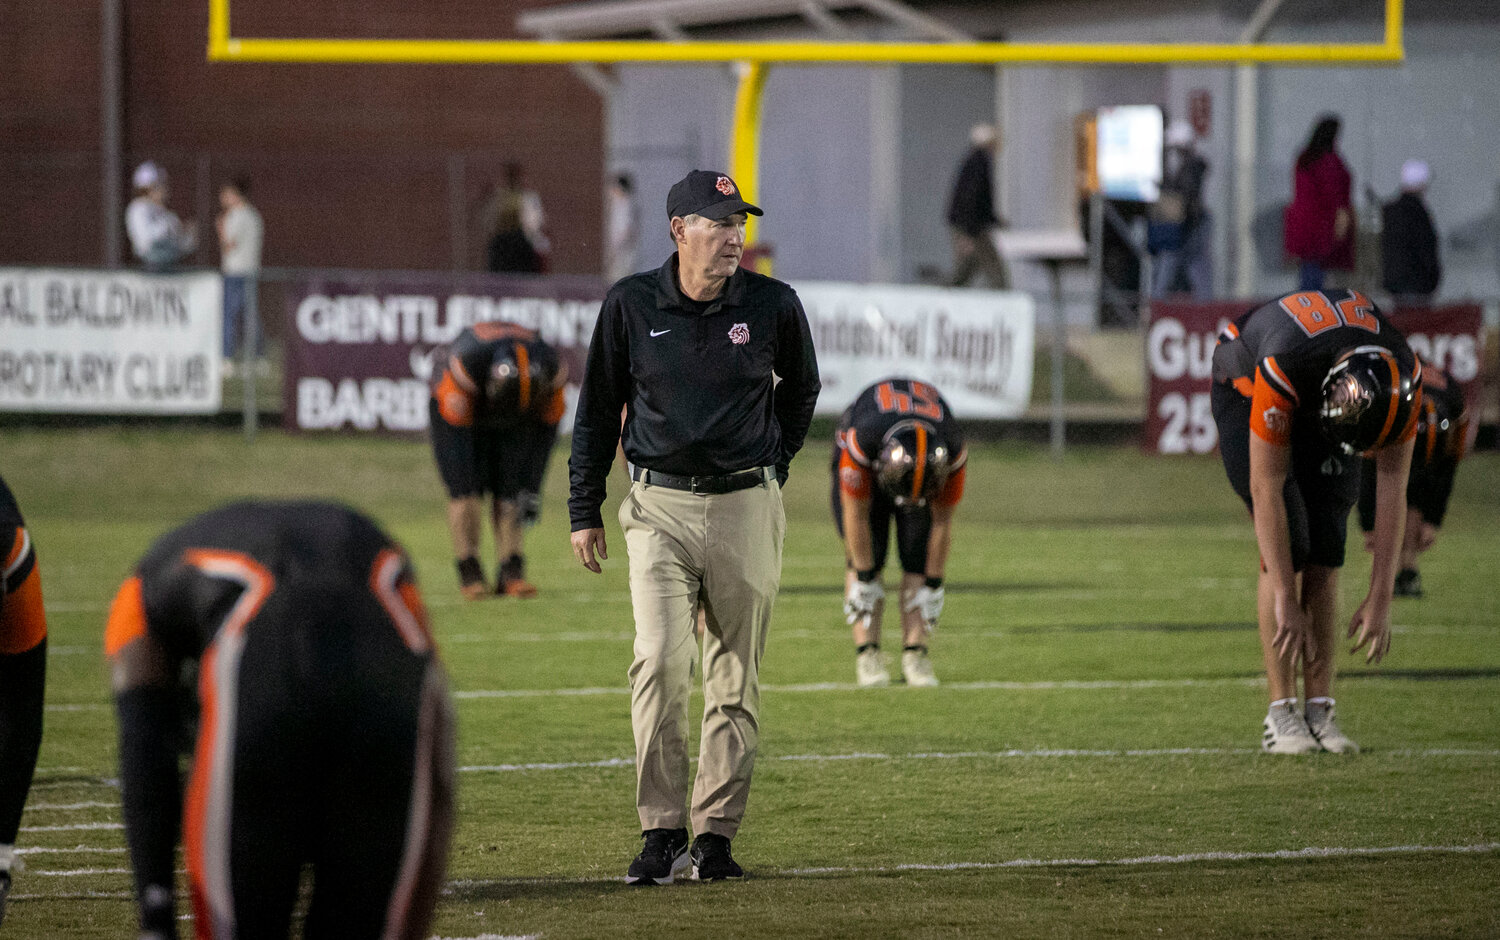 Baldwin County head football coach Scott Rials surveys his team as they warm up for a Class 6A Region 1 away contest against the Robertsdale Golden Bears at JD Sellars Stadium on Nov. 3. Although the Tigers earned a 43-13 win to close the season, Baldwin County finished 2-8 overall and relieved Rials of his head coaching duties.